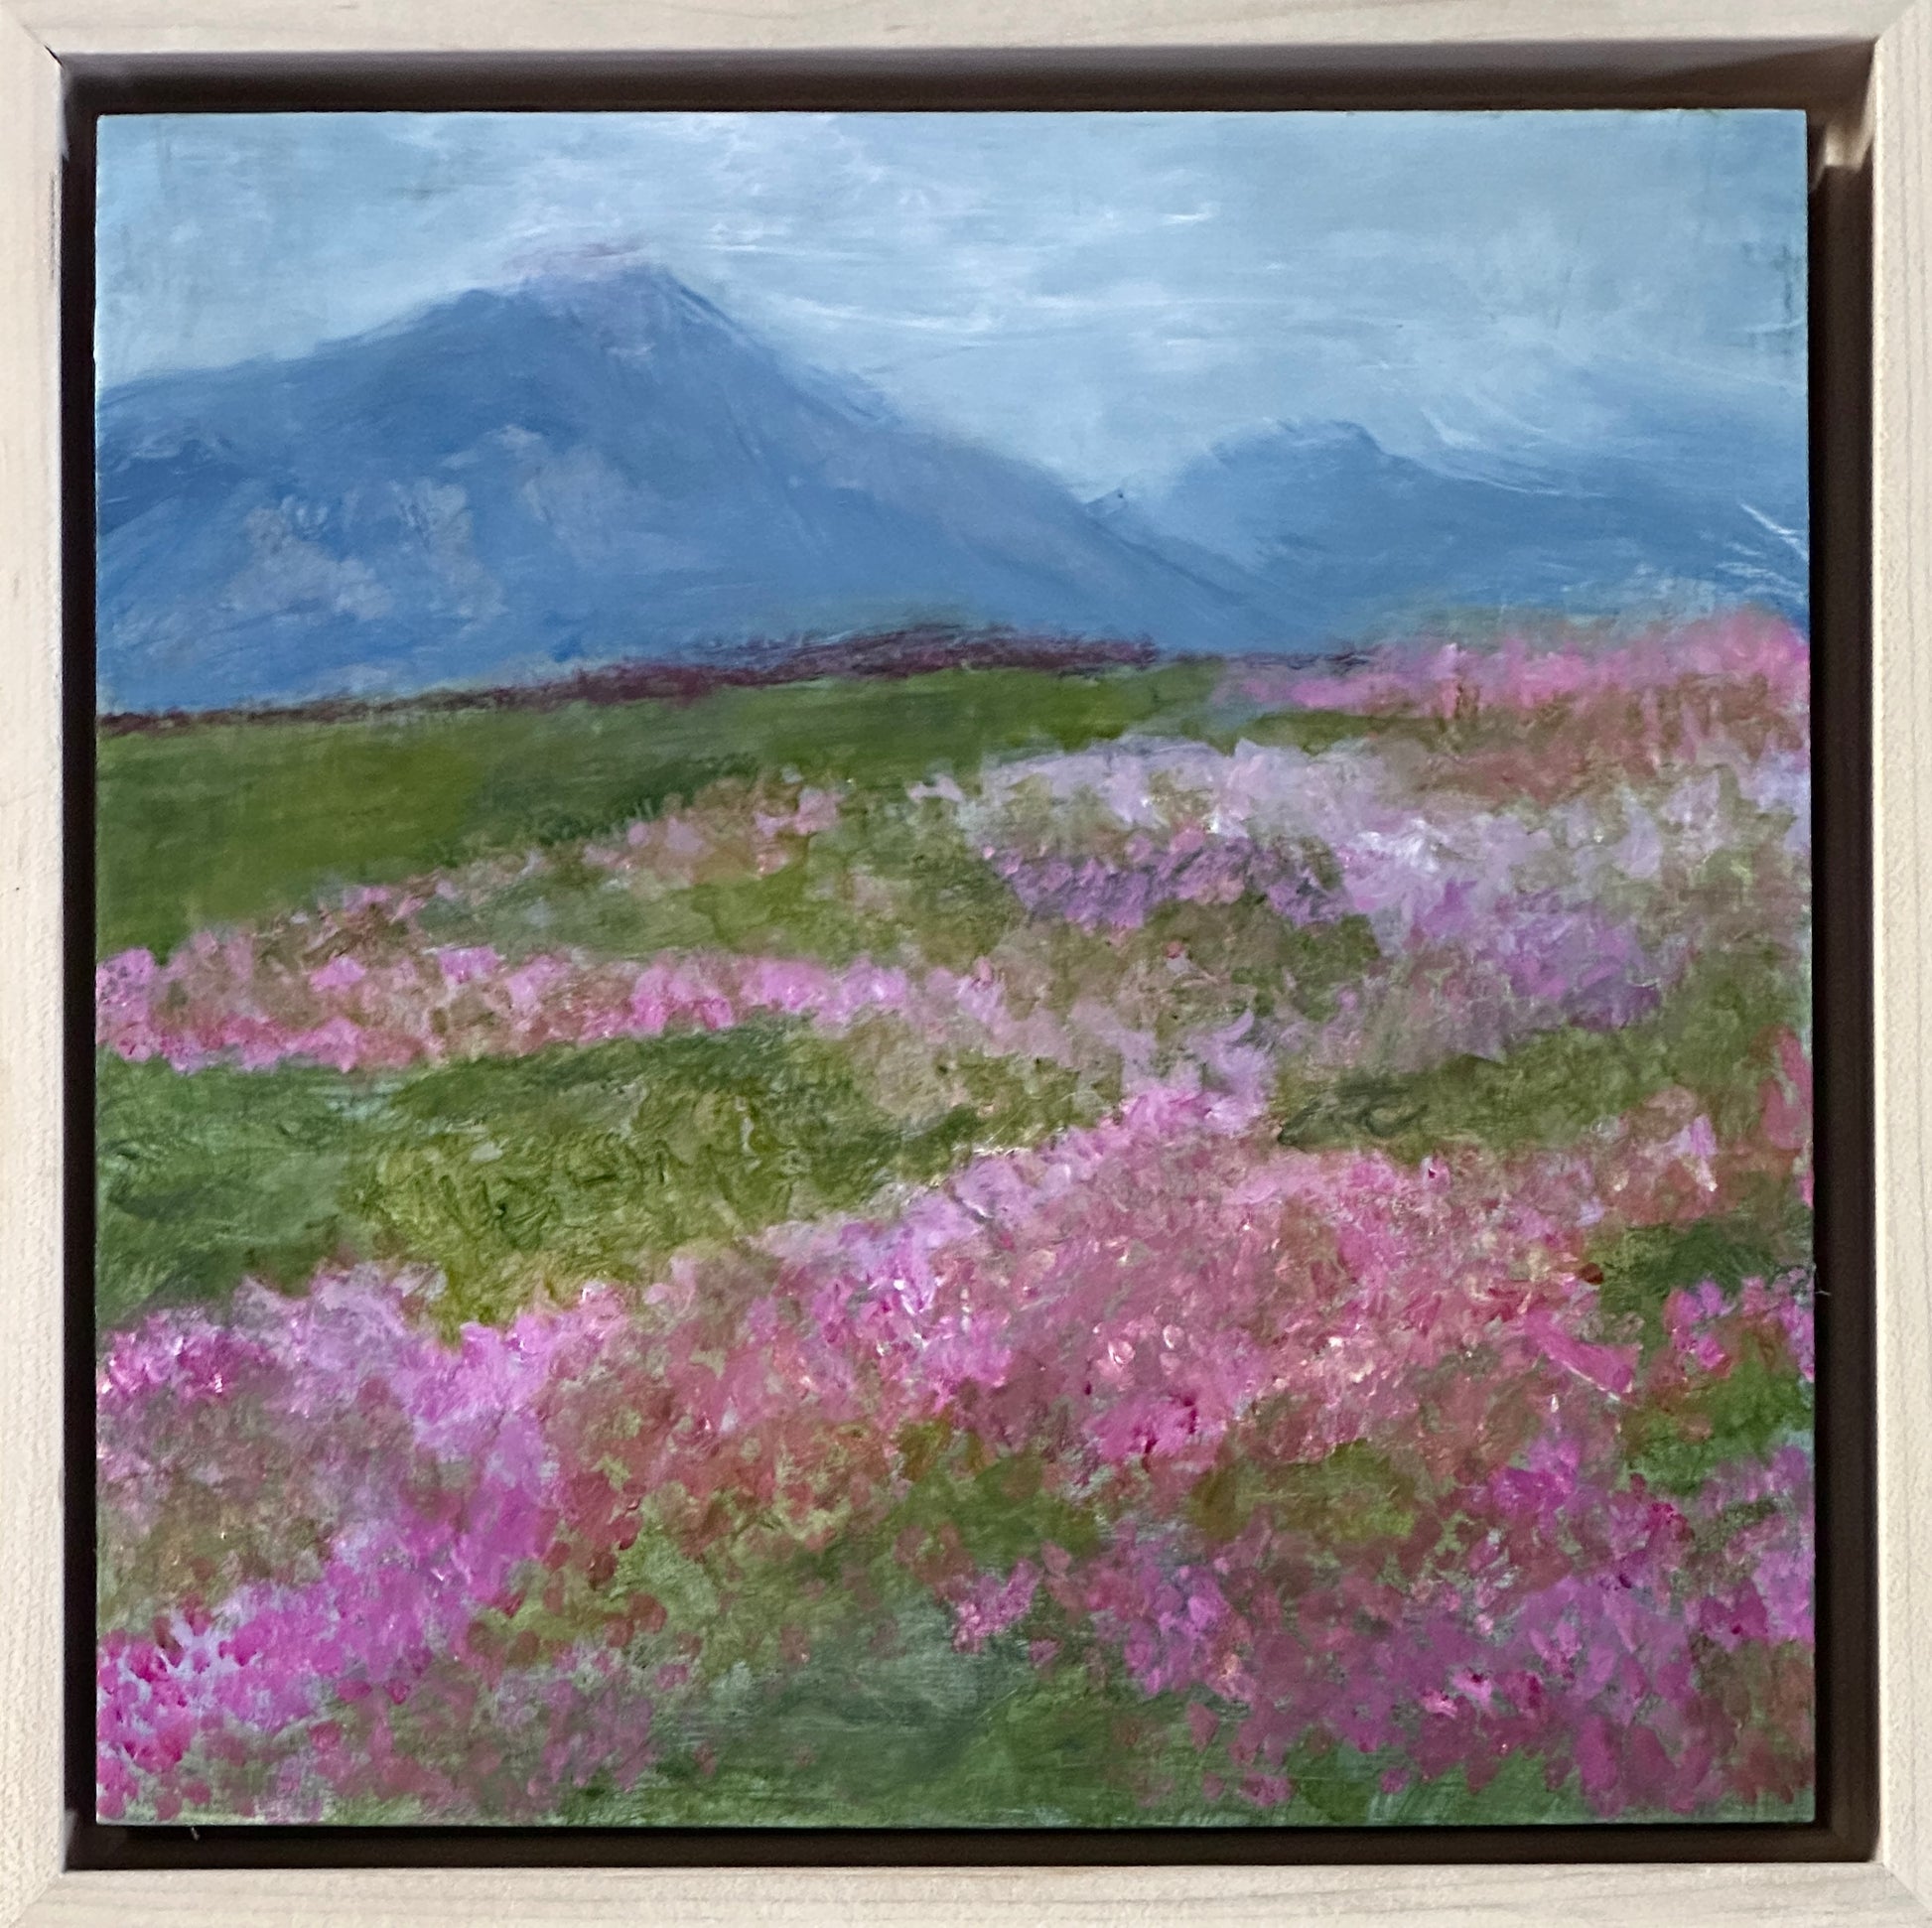 8 x 8 x 1.5-inch, framed, impression of a field of azaleas blooming in Spring.  Acrylic painting on cradled panel with natural wood frame.  By Cumming, GA artist, Juanita Bellavance. Part of our 25 Days of Minis 2022 collection.  Collect them all!